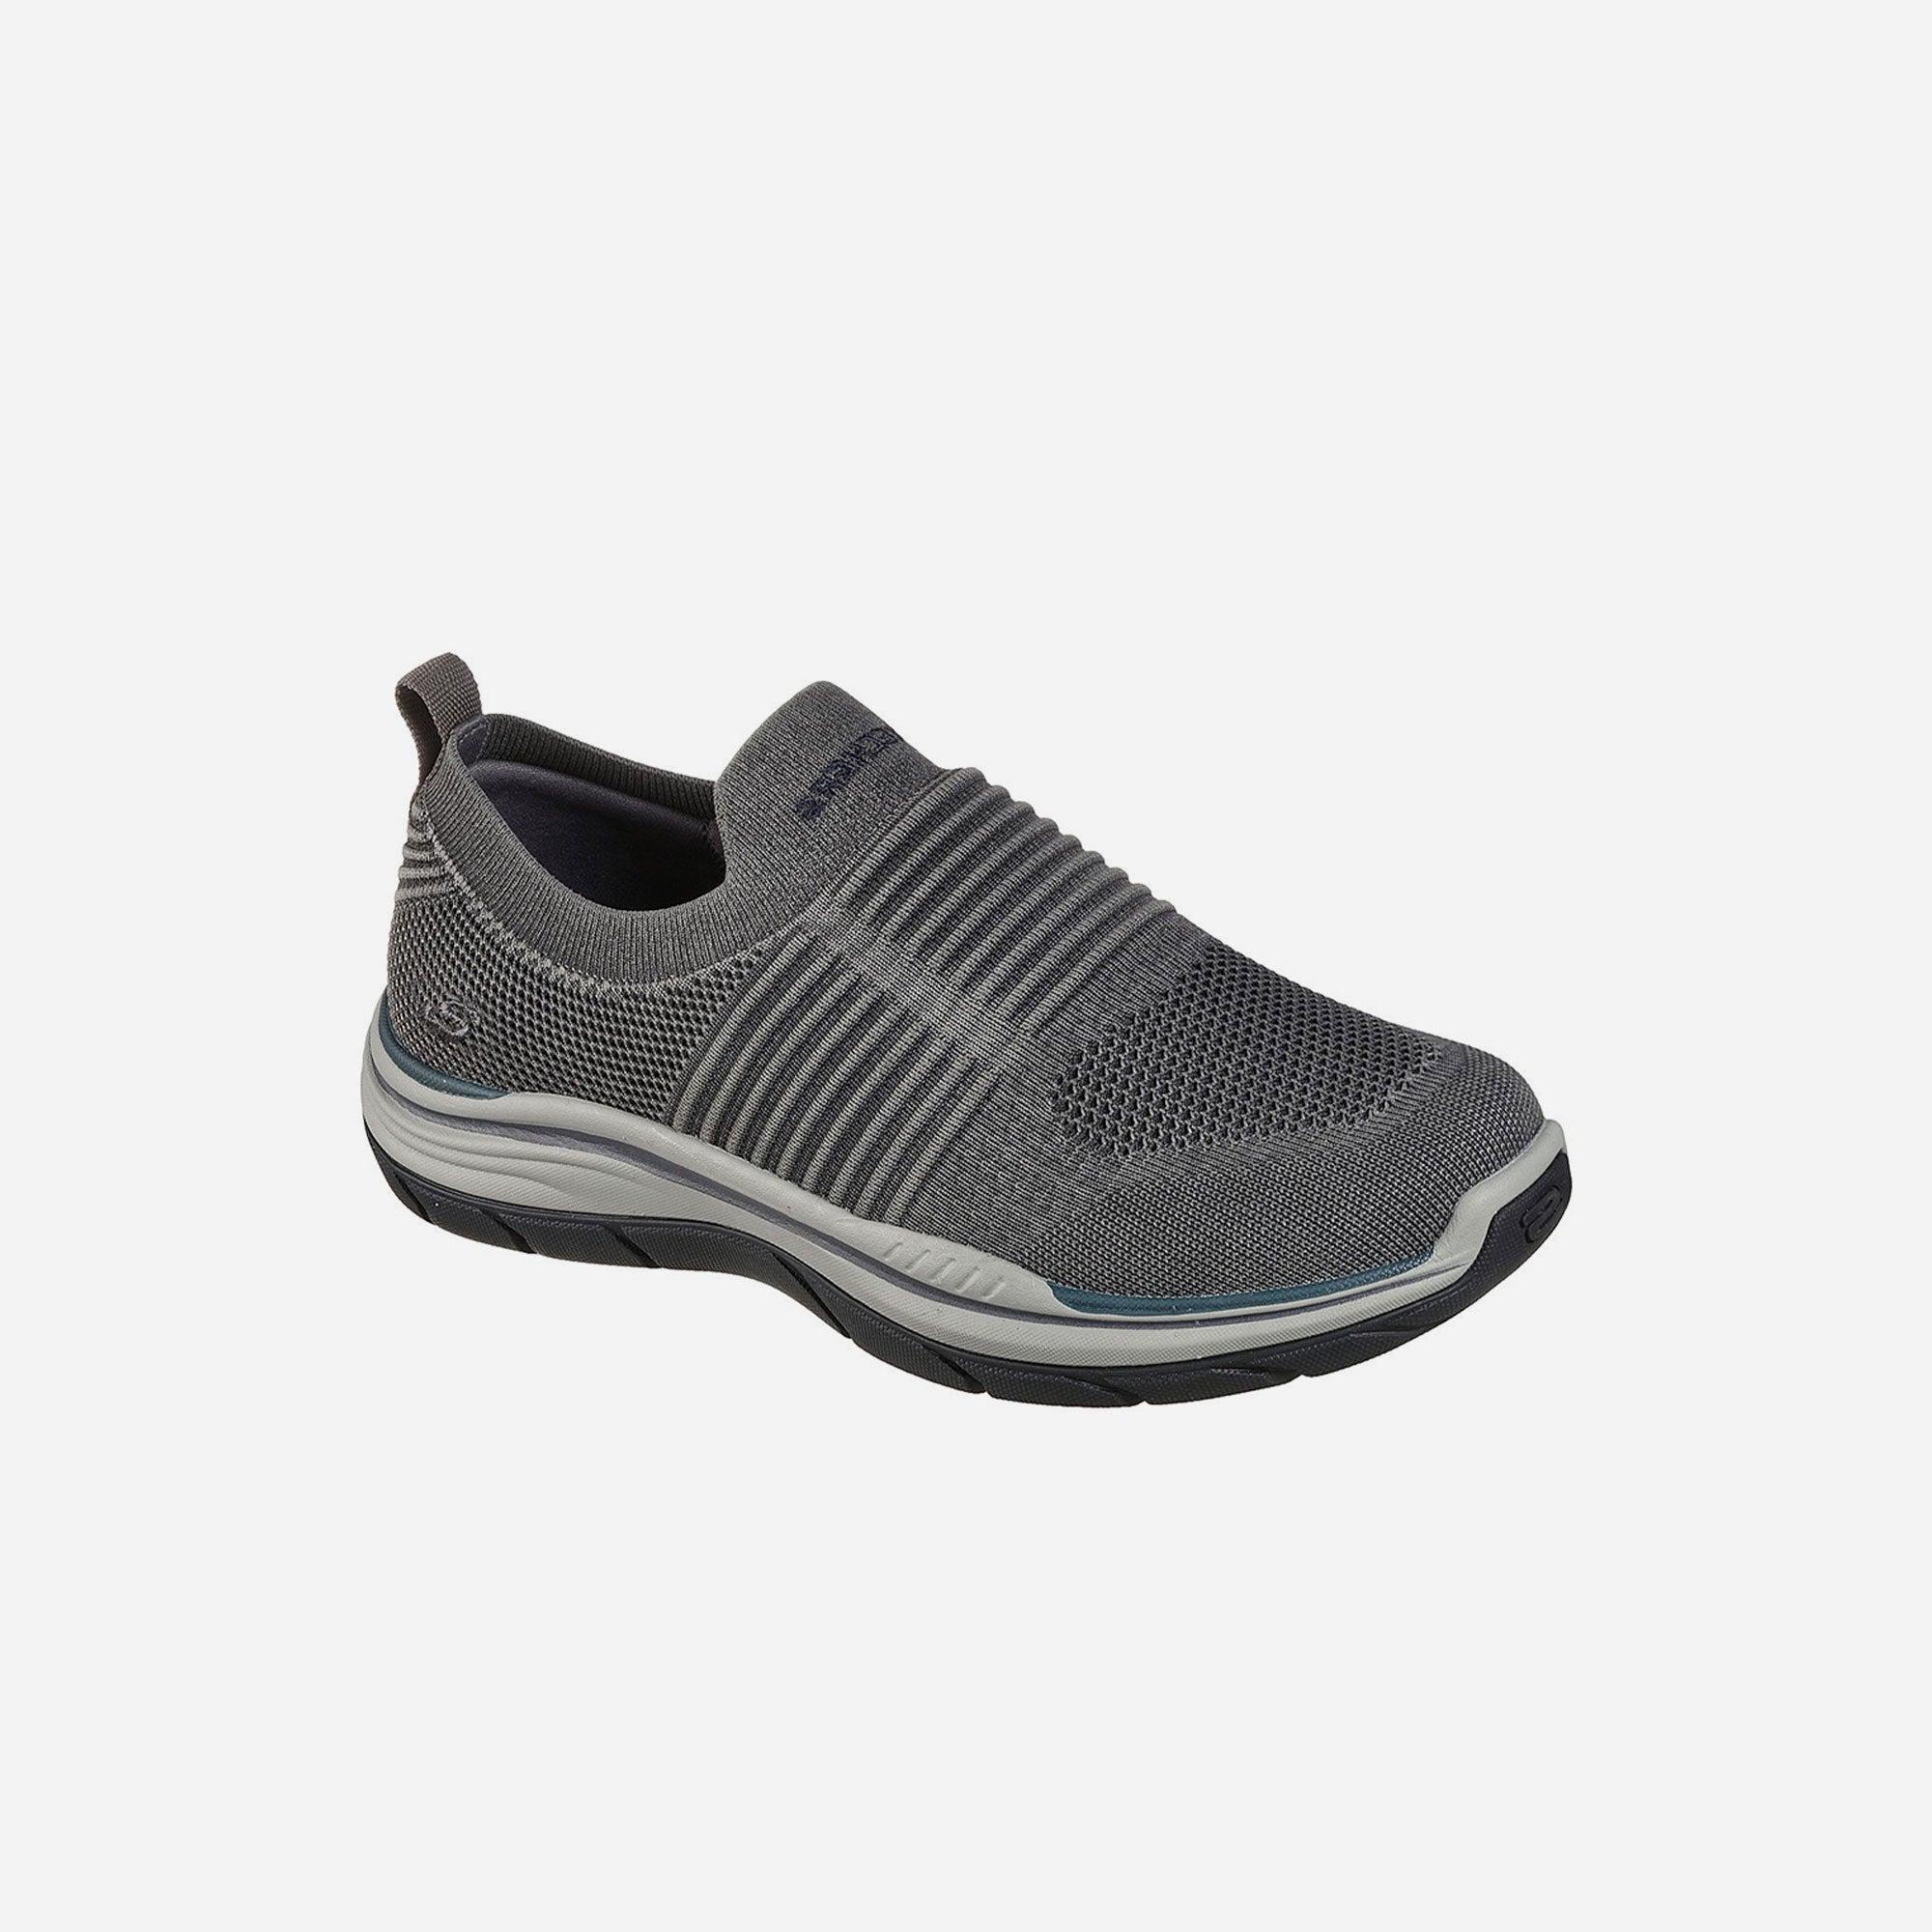 Giày sneaker nam Skechers Expected 2.0 - 204364-GRY